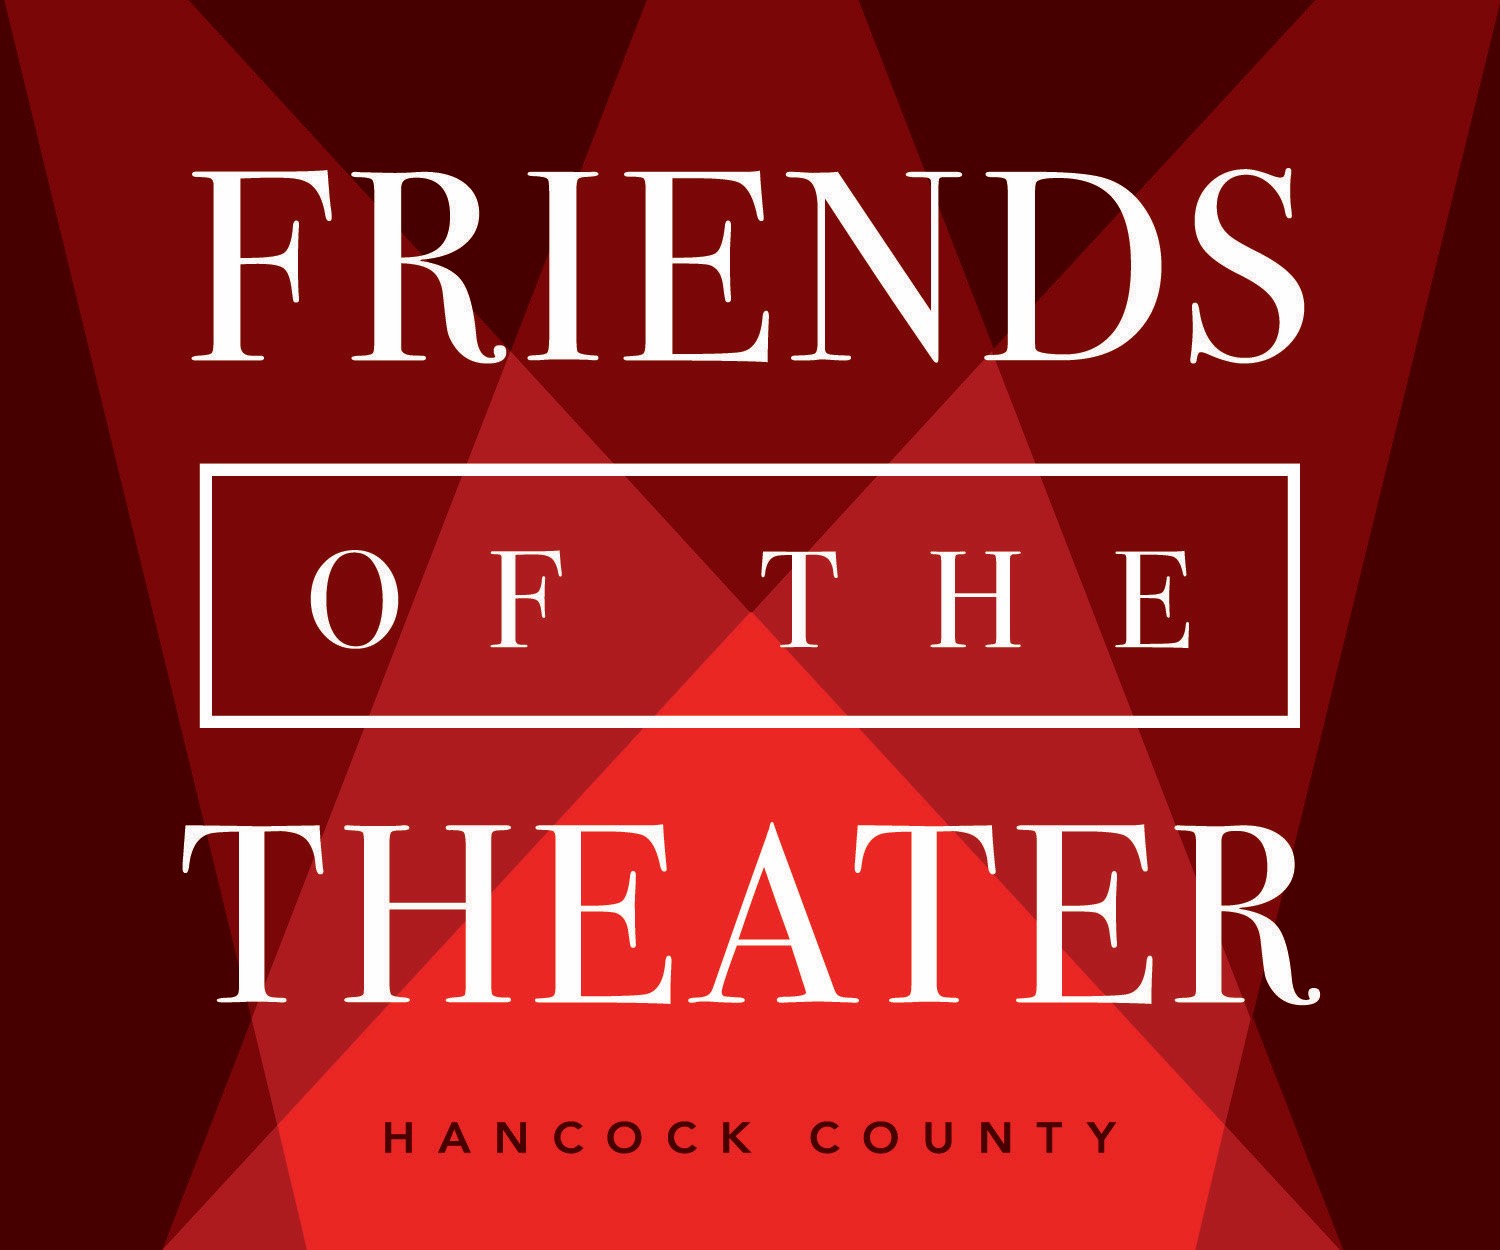 Friends of the Theater - Hancock County logo